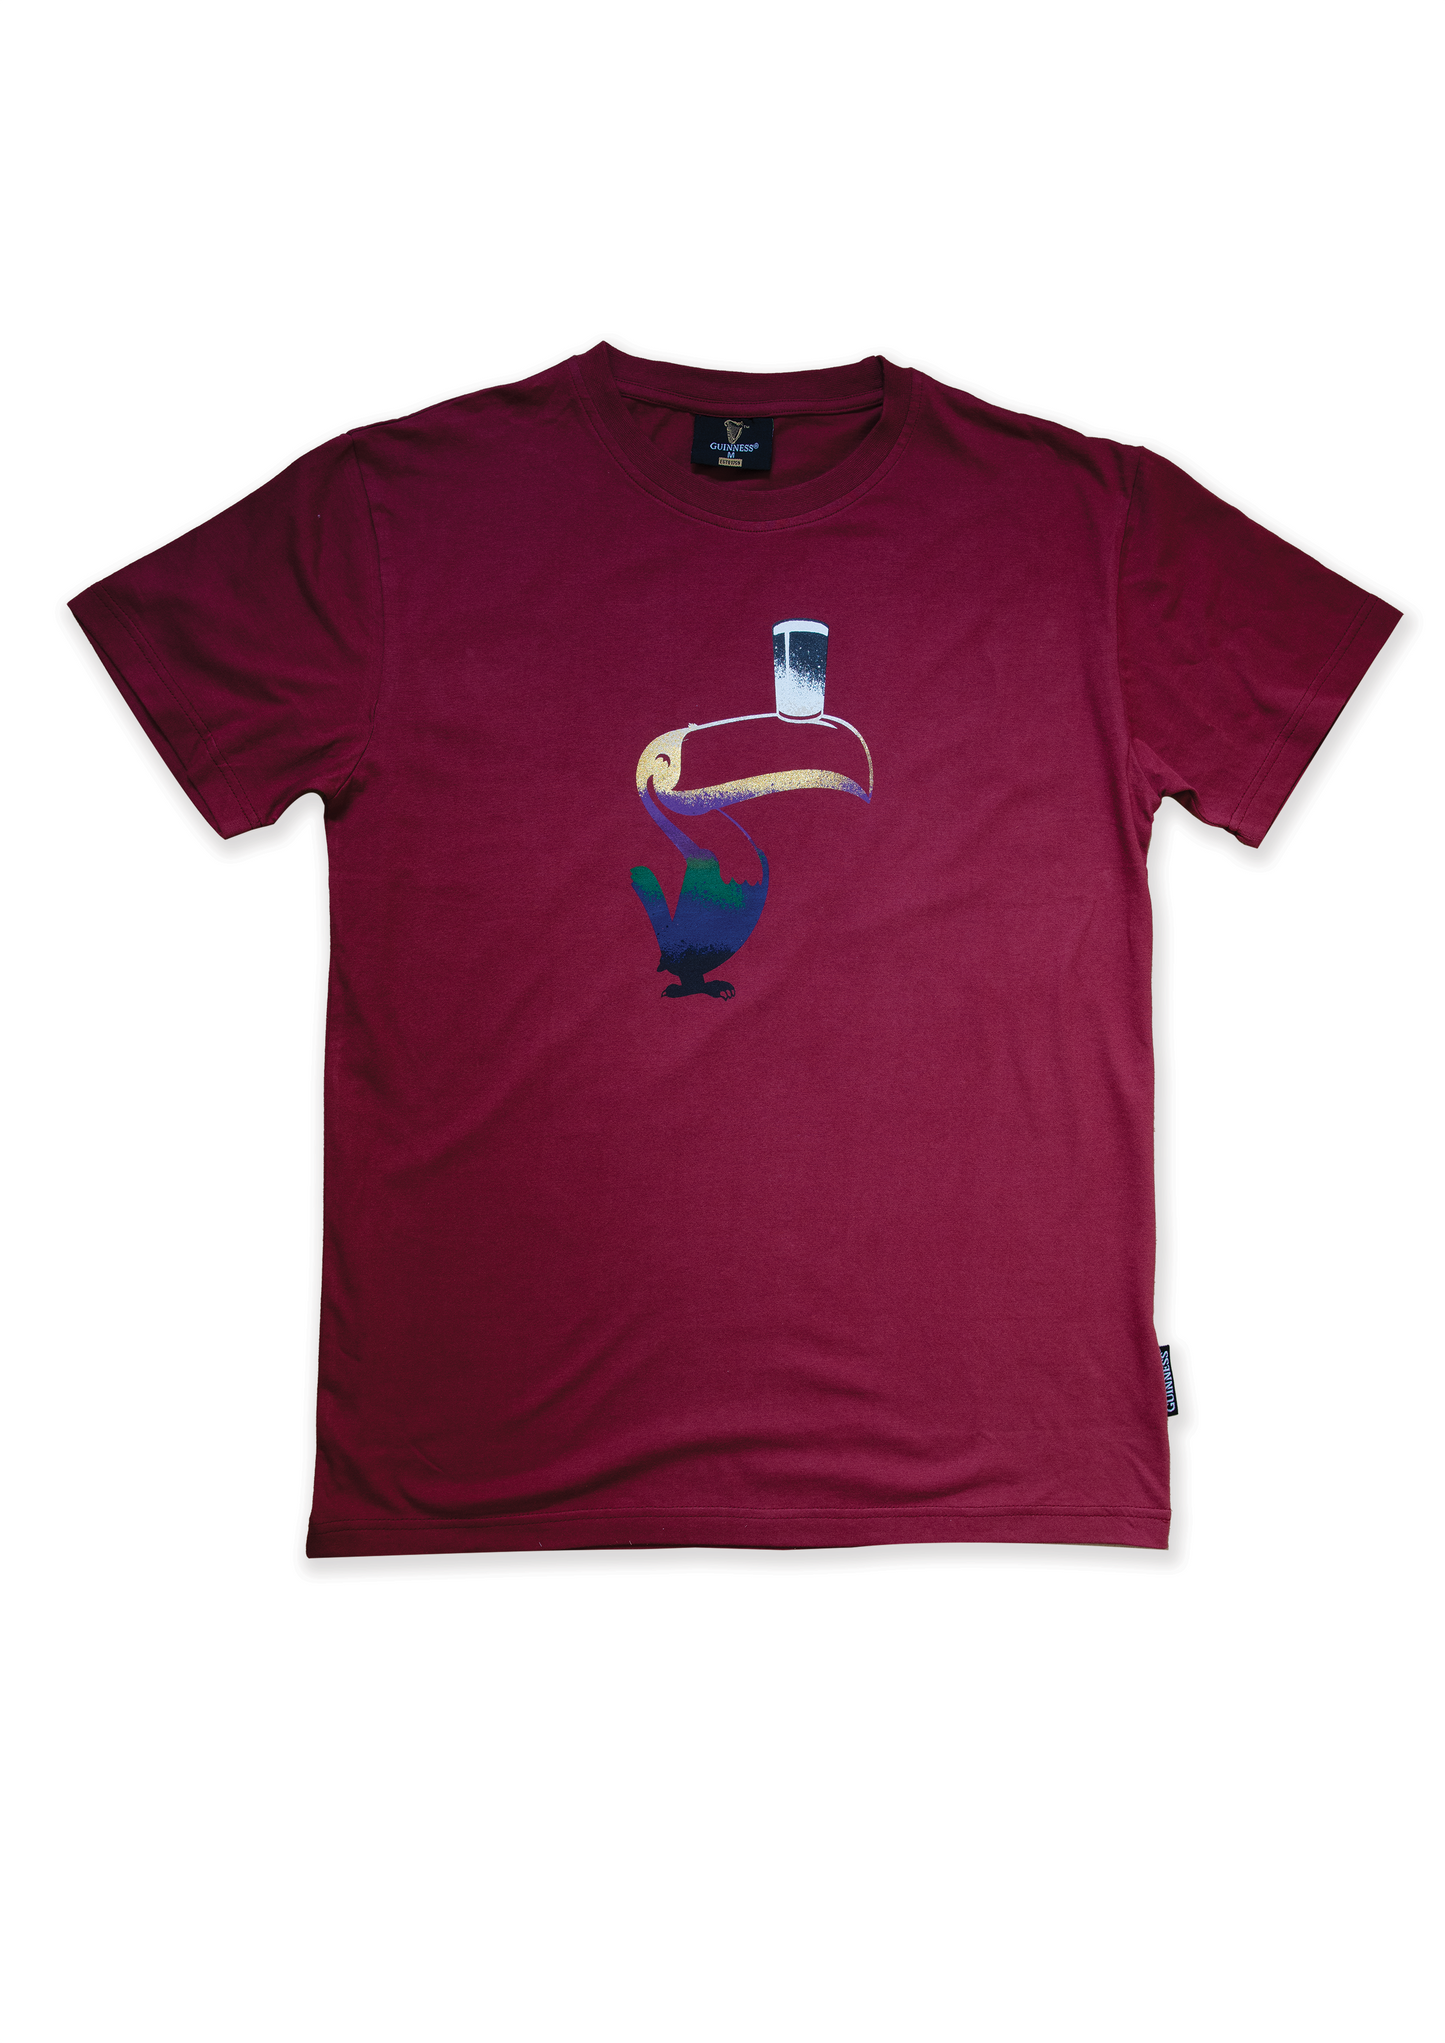 A Guinness Liquid Toucan T-Shirt - Red with an image of a bird on it.